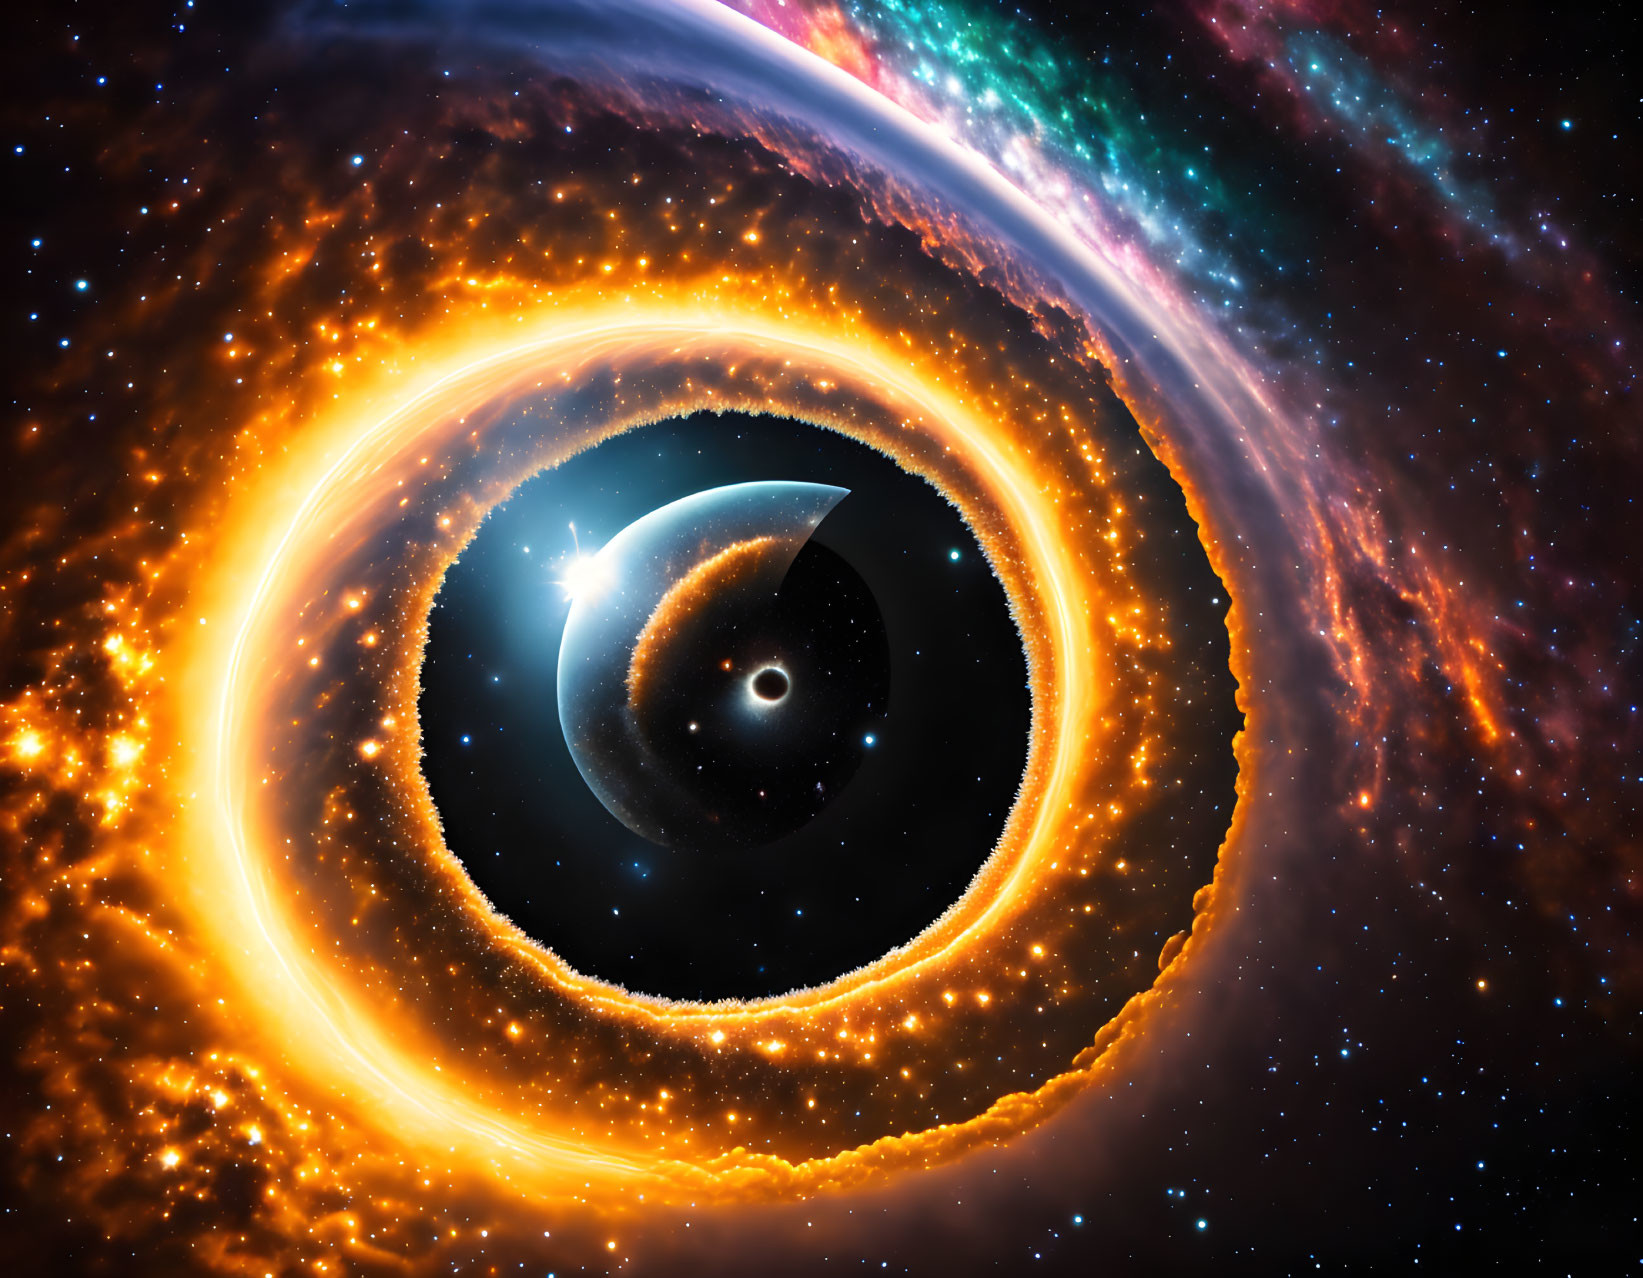 Colorful Cosmic Illustration: Black Hole with Accretion Disk